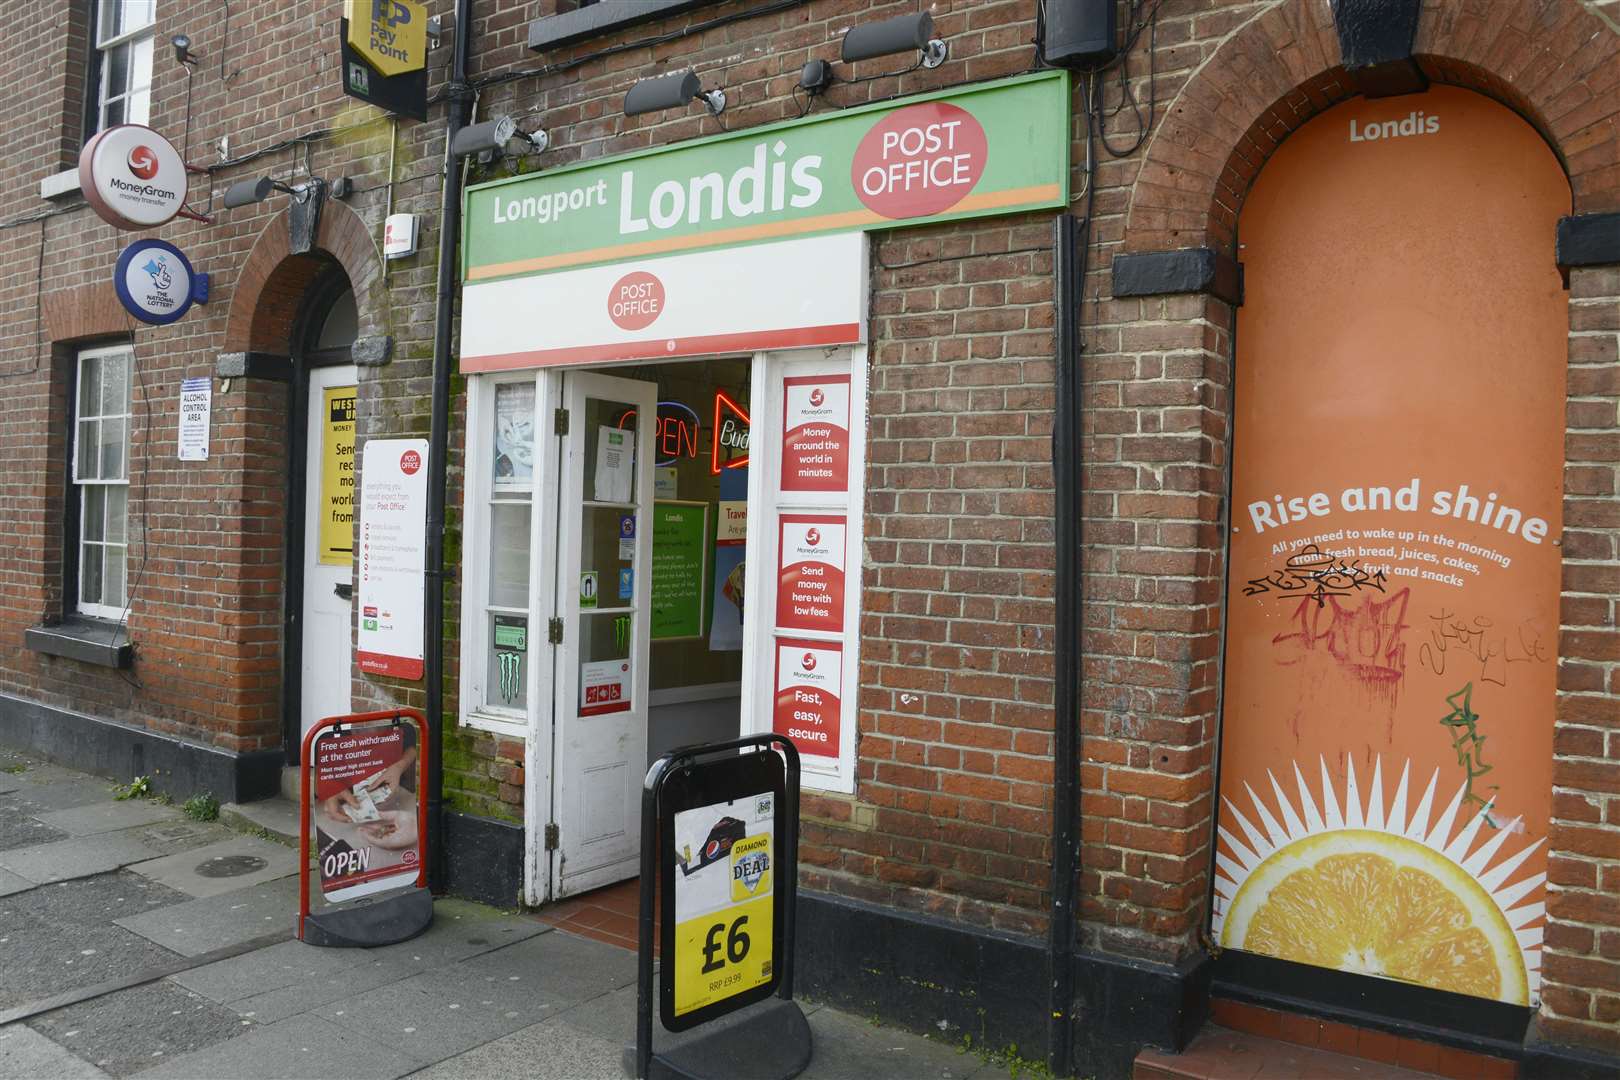 Londis stores could be hit by the proposed strike action. Picture: Paul Amos